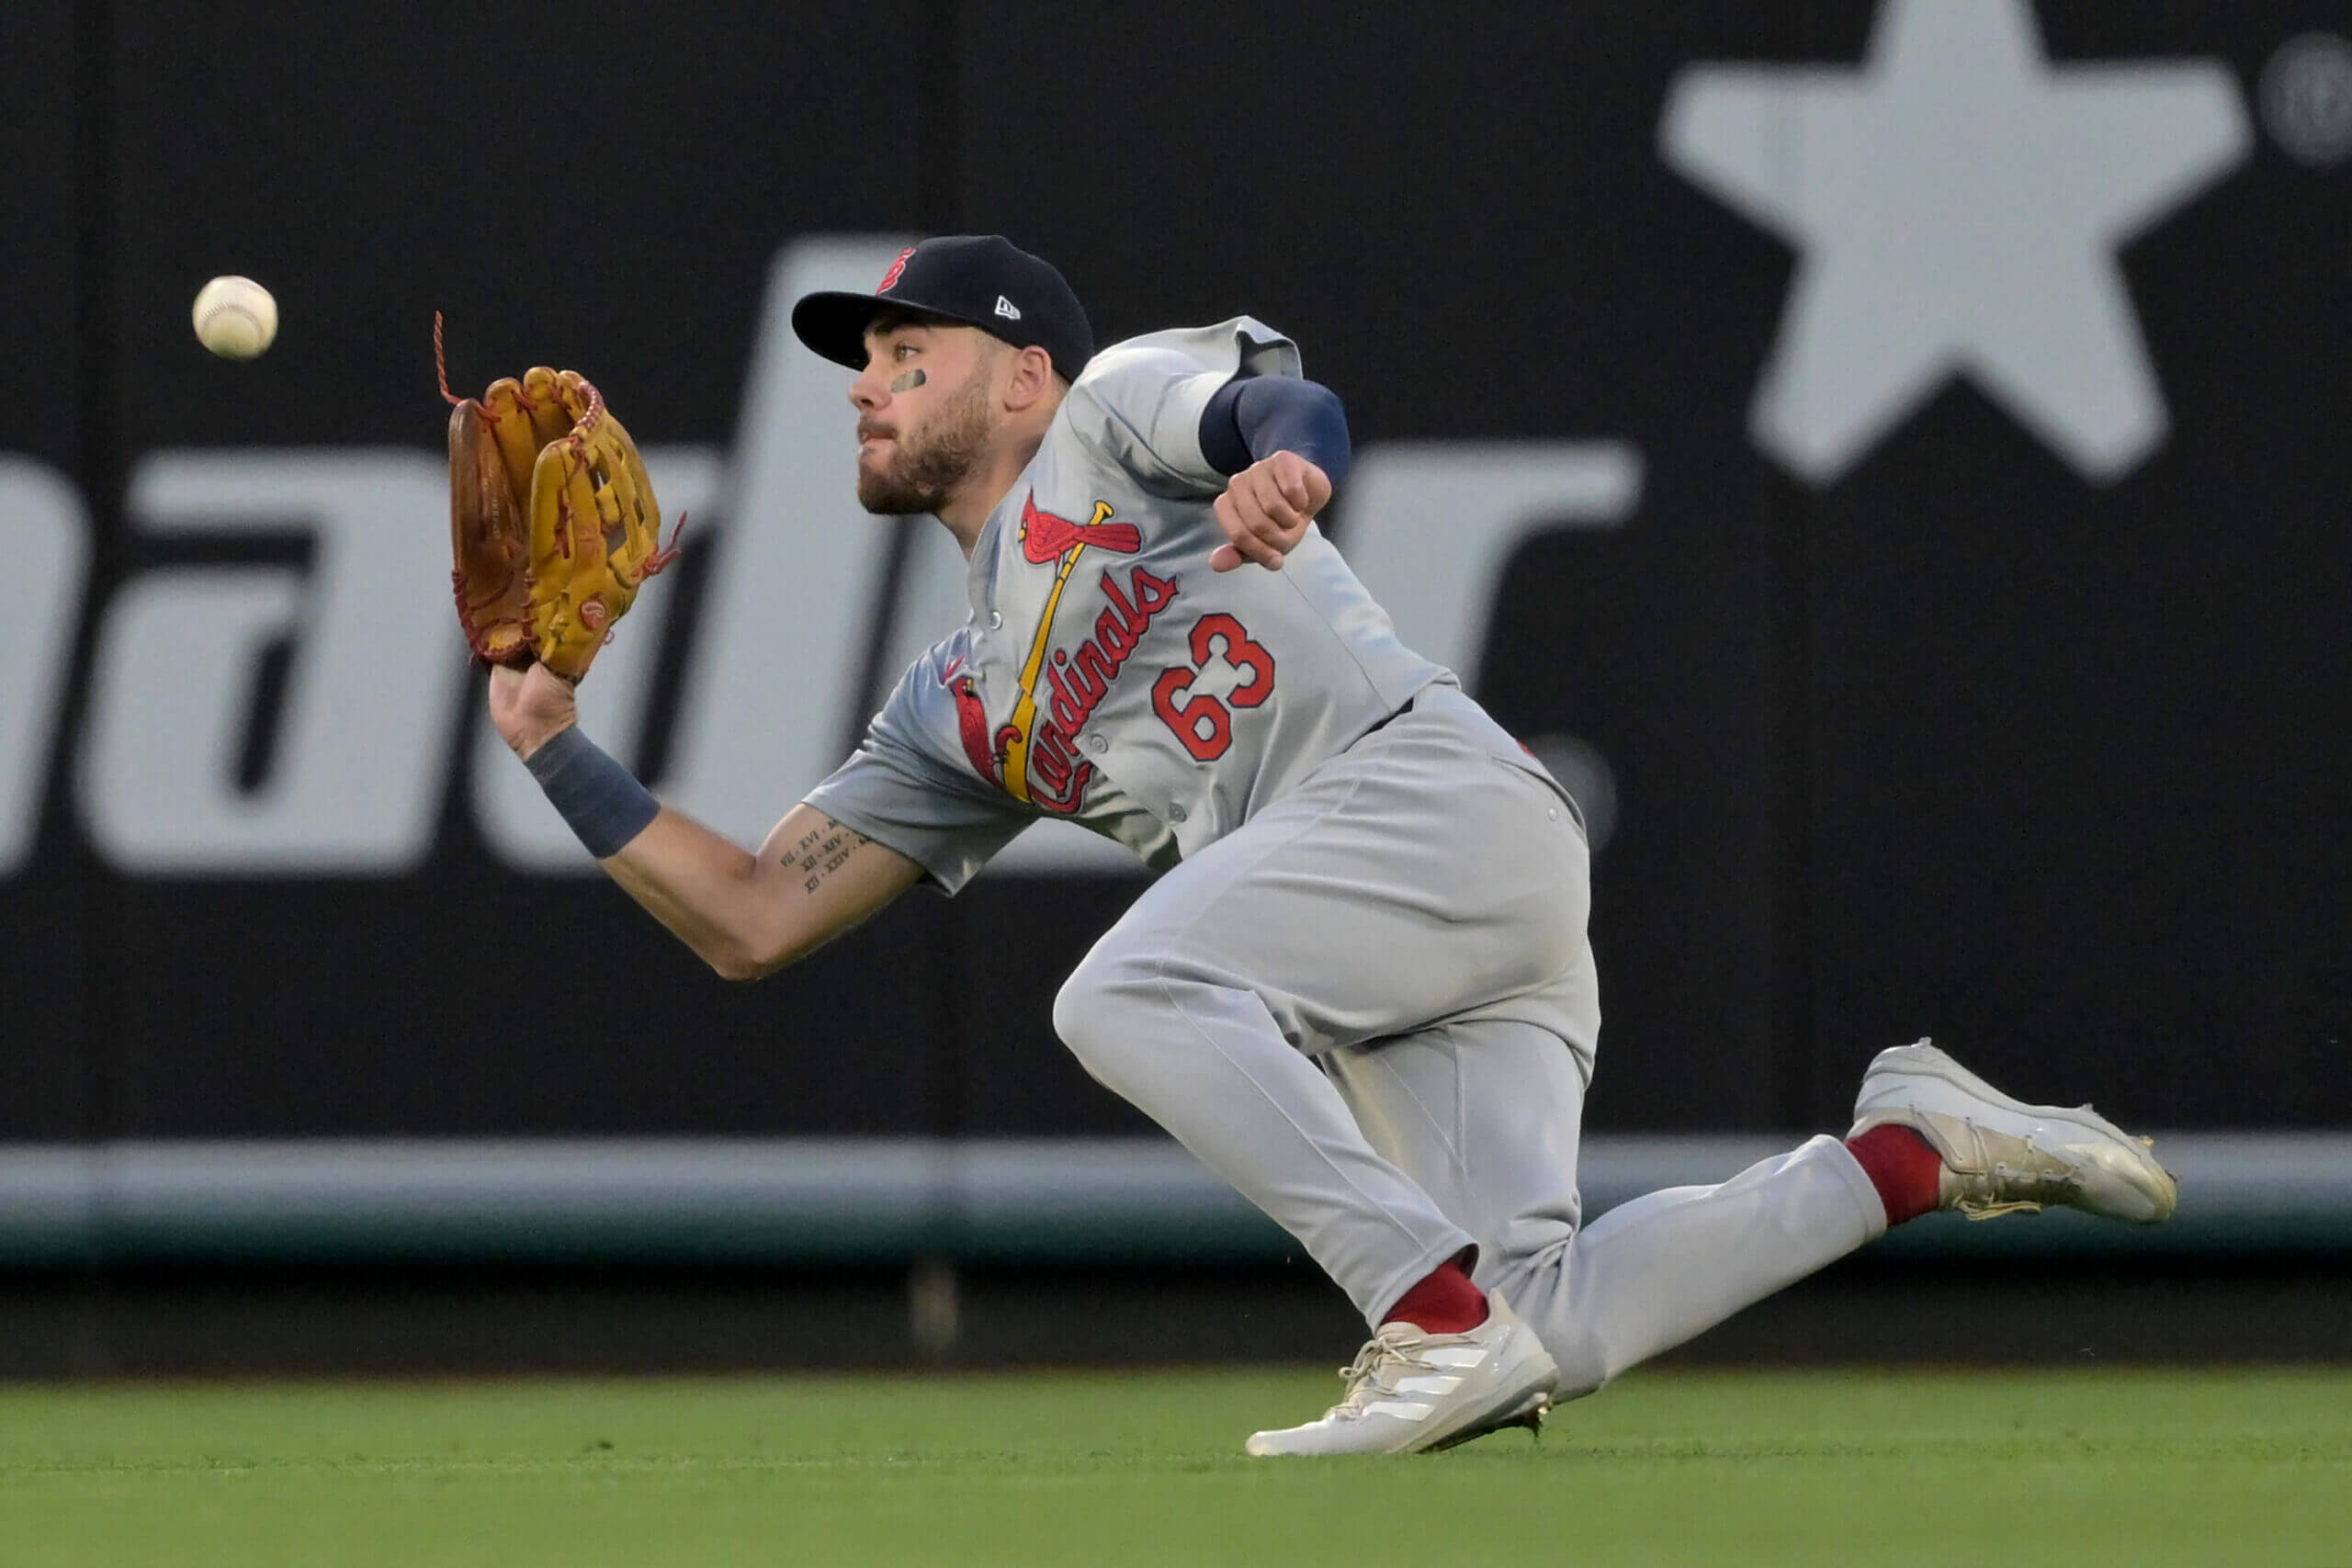 Three Cardinals takeaways on the first half of the season